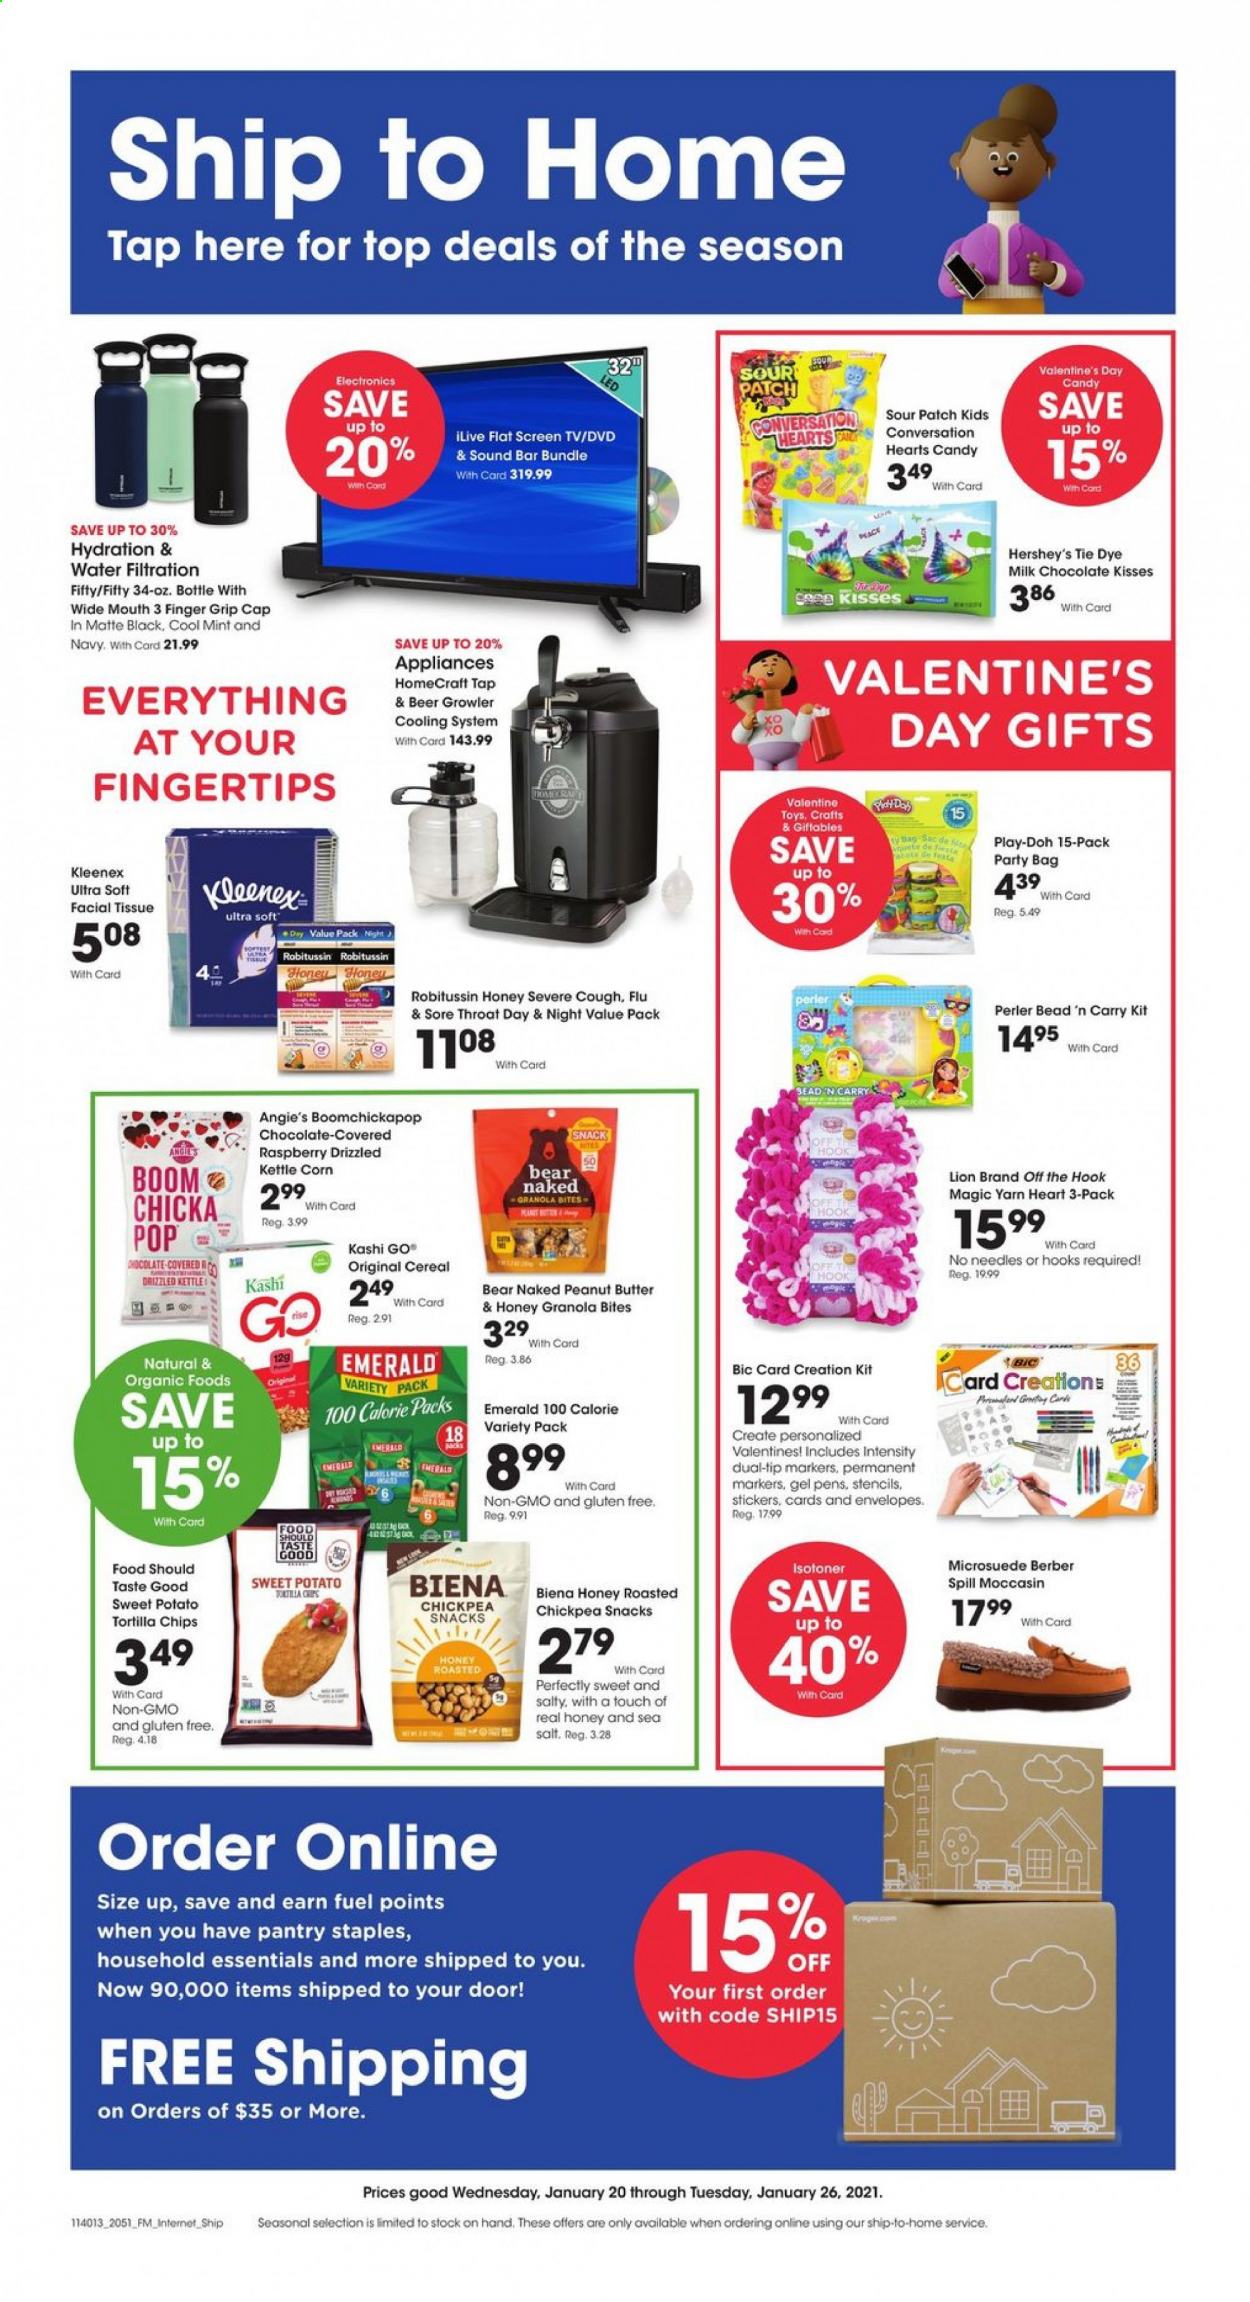 thumbnail - King Soopers Flyer - 01/20/2021 - 01/26/2021 - Sales products - Ace, Hershey's, sweet potato, milk chocolate, chocolate, Sour Patch, tortilla chips, kettle corn, chips, snack, sea salt, cereals, granola, honey, peanut butter, beer, Kleenex, tissues, BIC, hook, sticker, envelope, DVD, water filter, TV, sound bar, kettle, cap, bag, Play-doh, toys, Robitussin. Page 1.